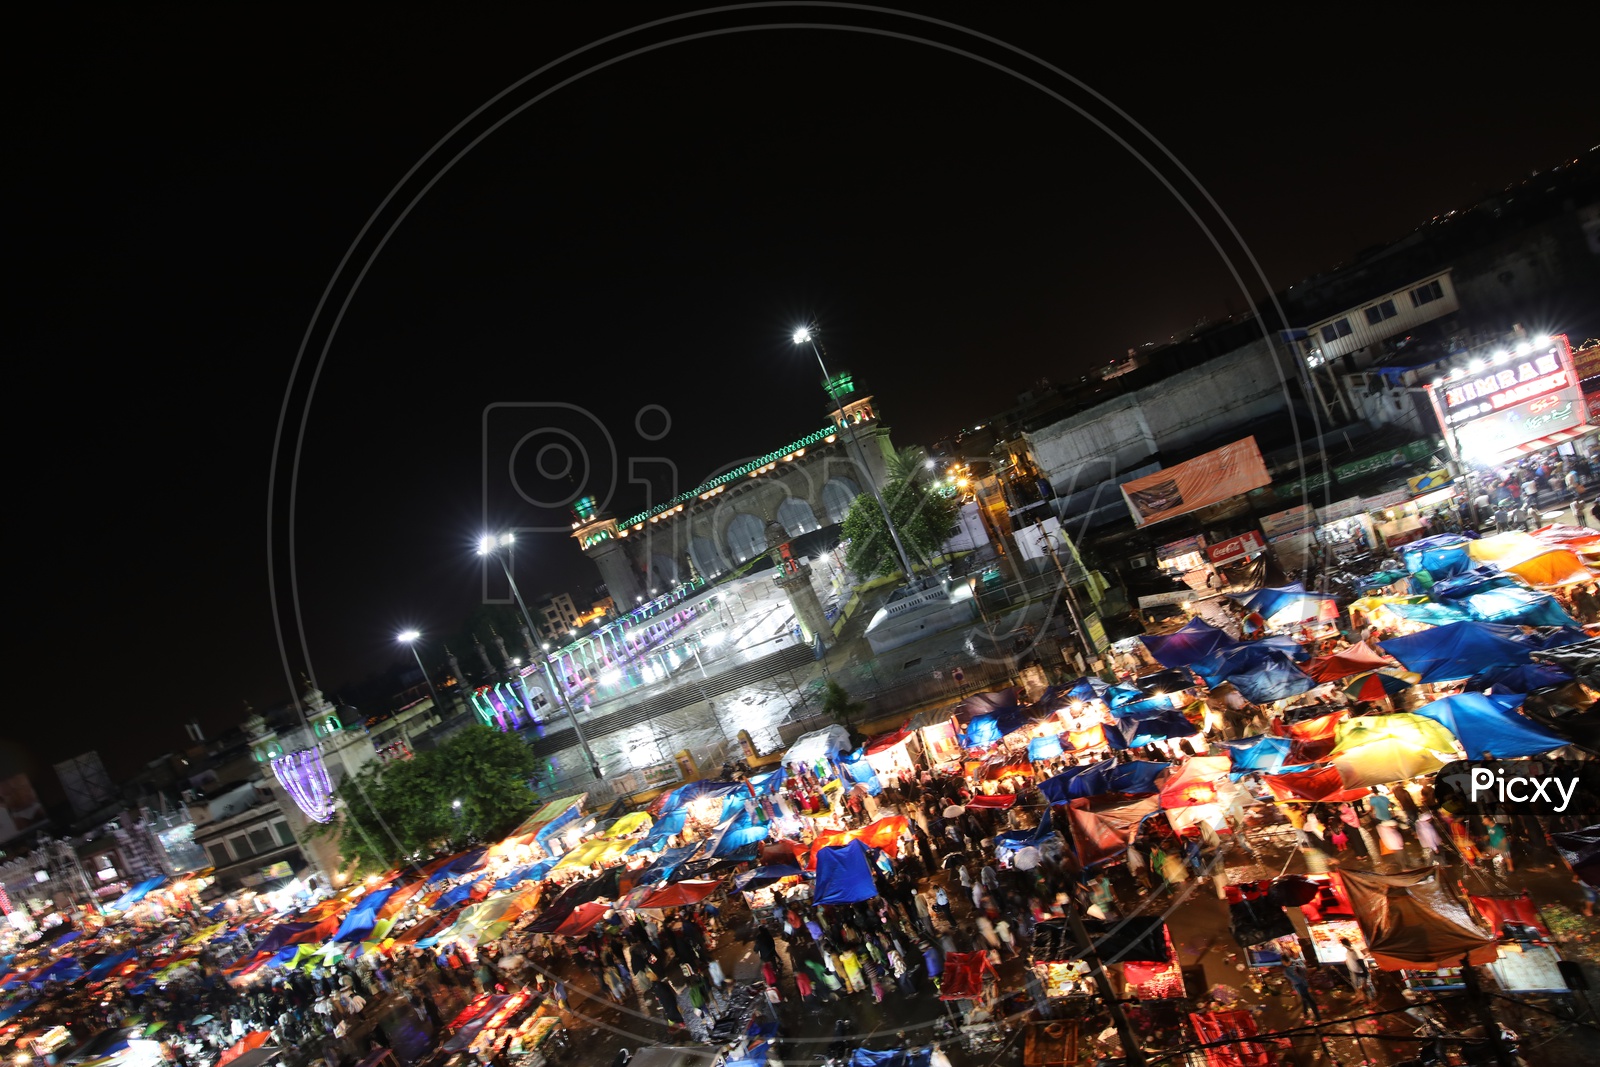 A Beautiful Aerial shot Of  The Vendor Stalls Around The Streets Of Charminar